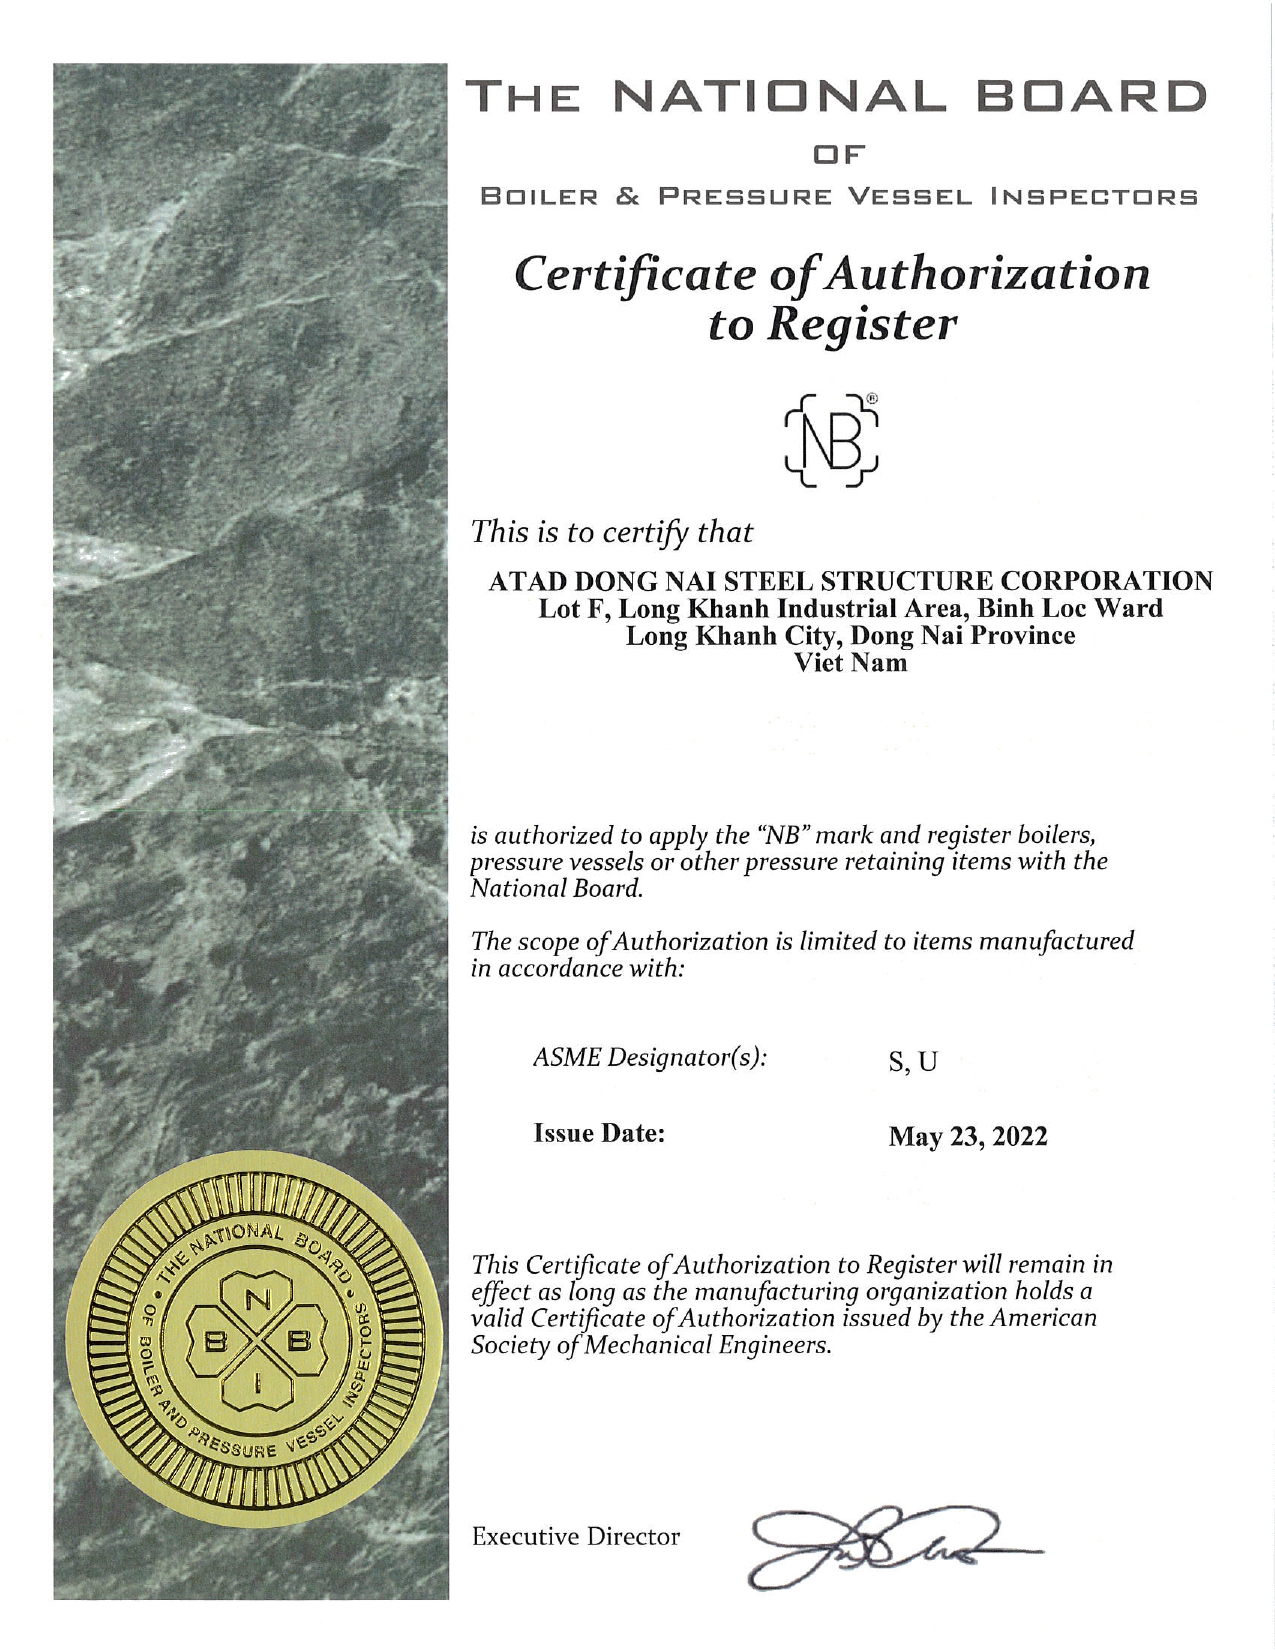 the national board of boiler & pressure vesel inspectors certificate of authorization to register